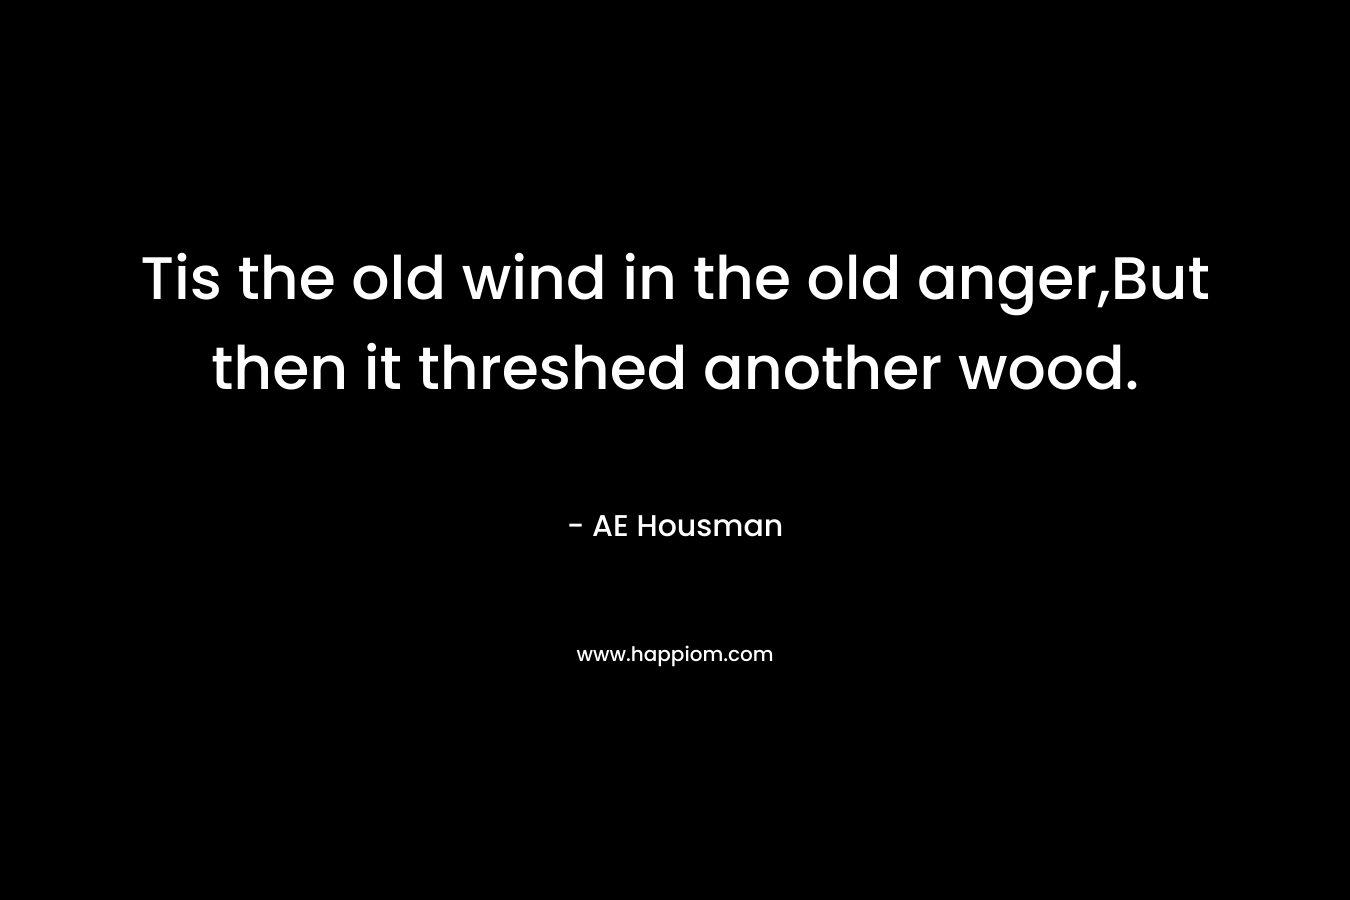 Tis the old wind in the old anger,But then it threshed another wood. – AE Housman